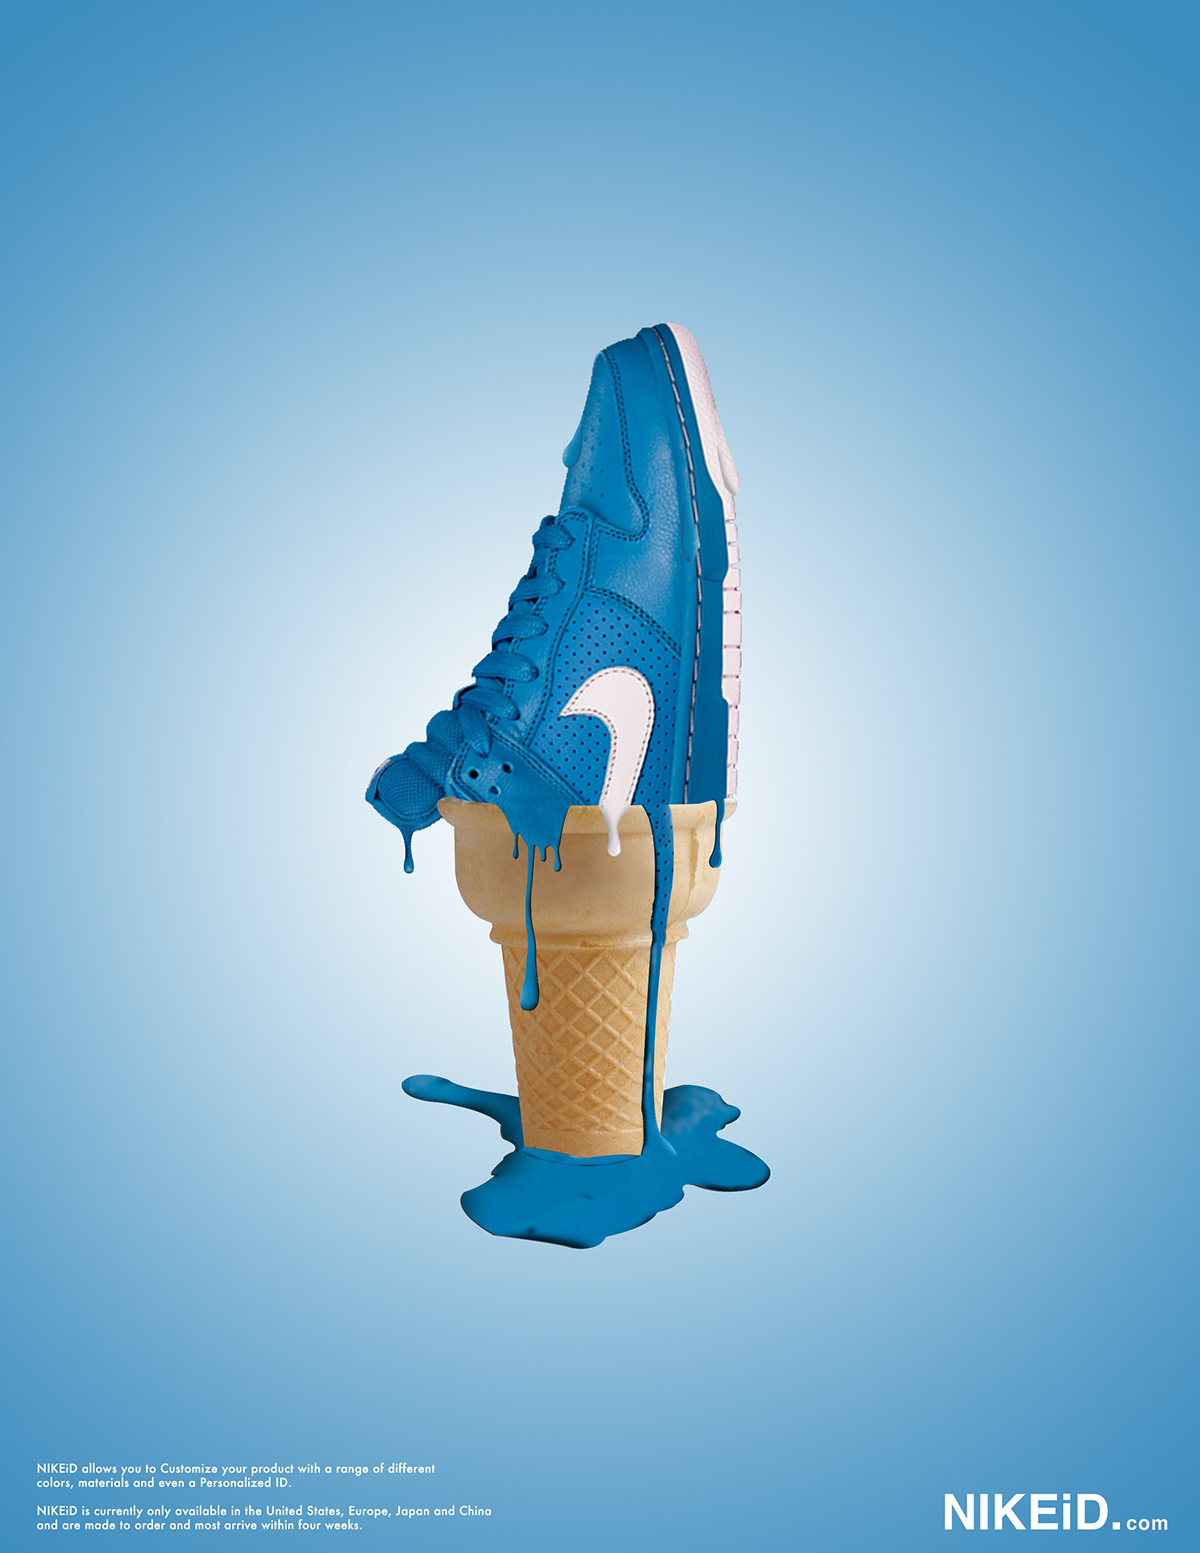 Nike ice cream shoes photoshop design Project print posters magazine page layout advertisment vintage Style art graphic